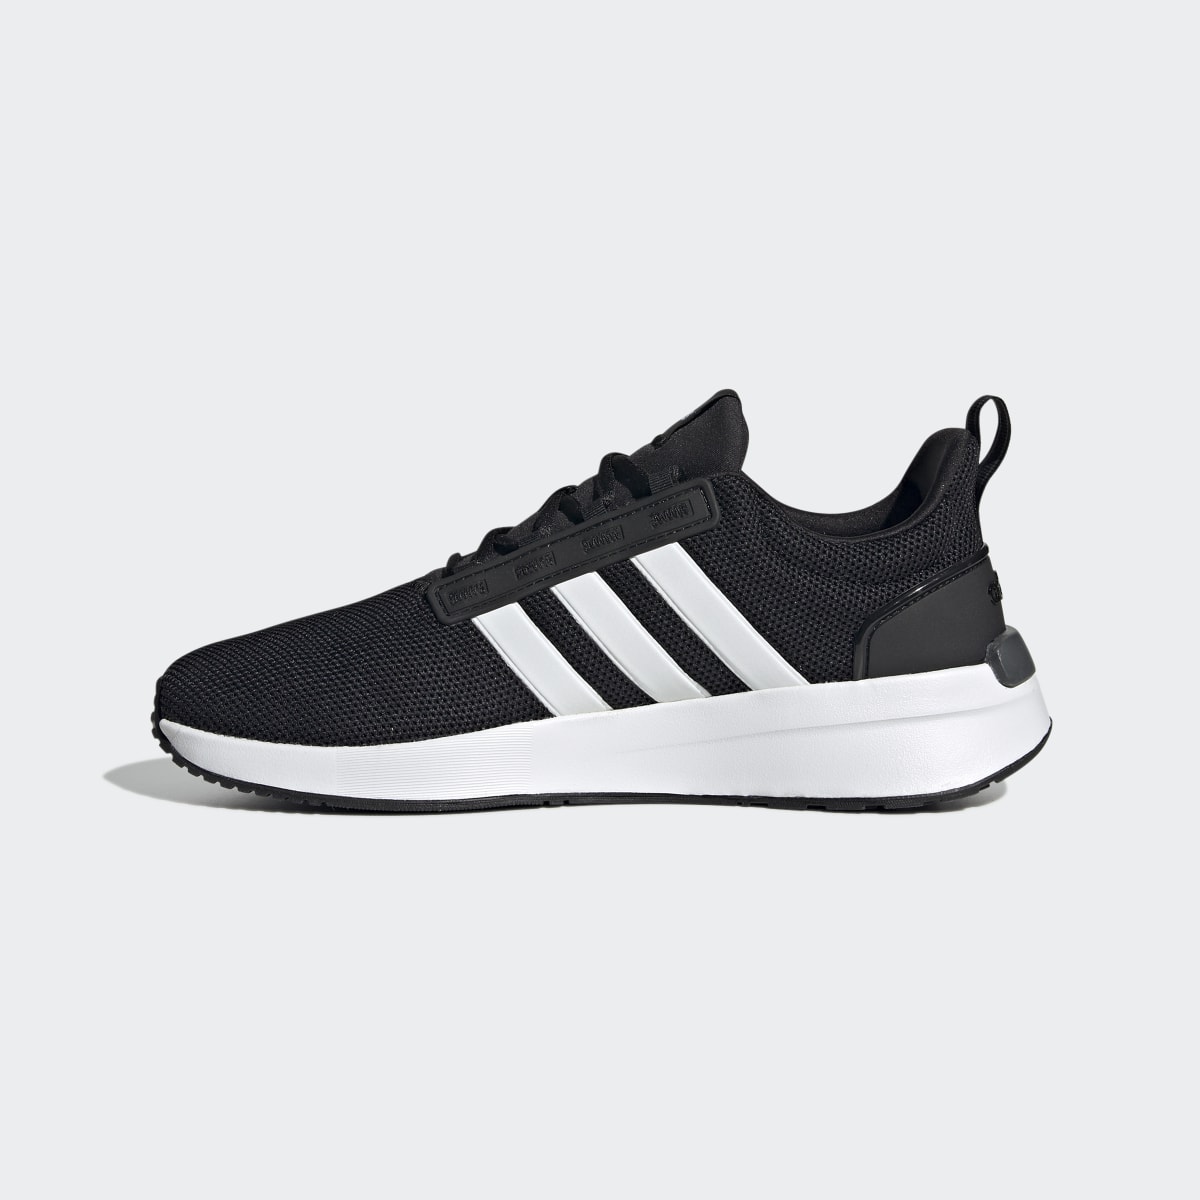 Adidas Racer TR21 Wide Shoes. 7